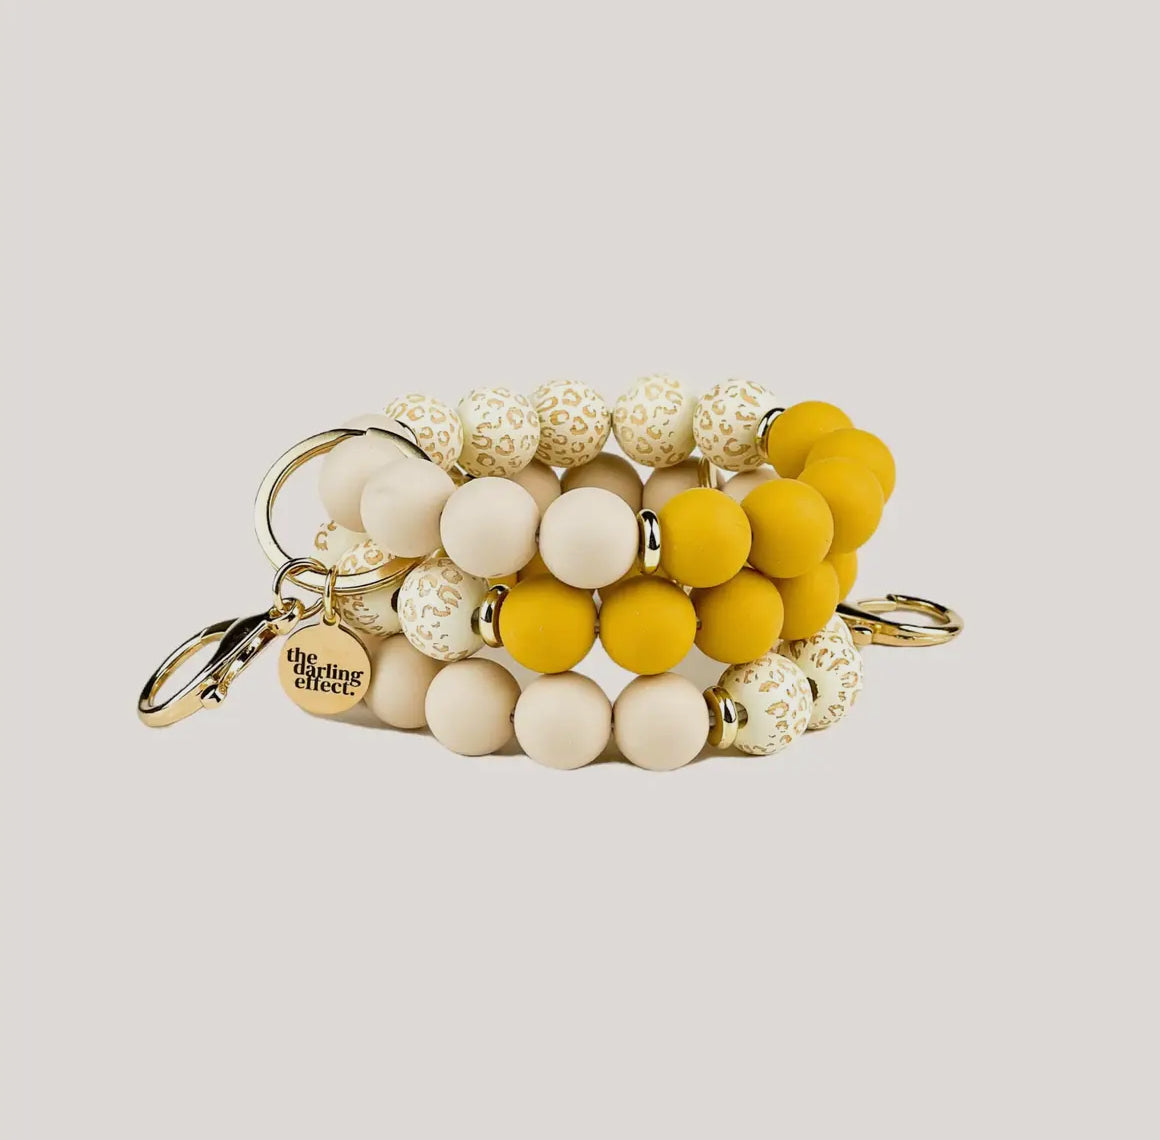 The Darling Effect Honey Gold Hands-Free Key Chain Wristlet